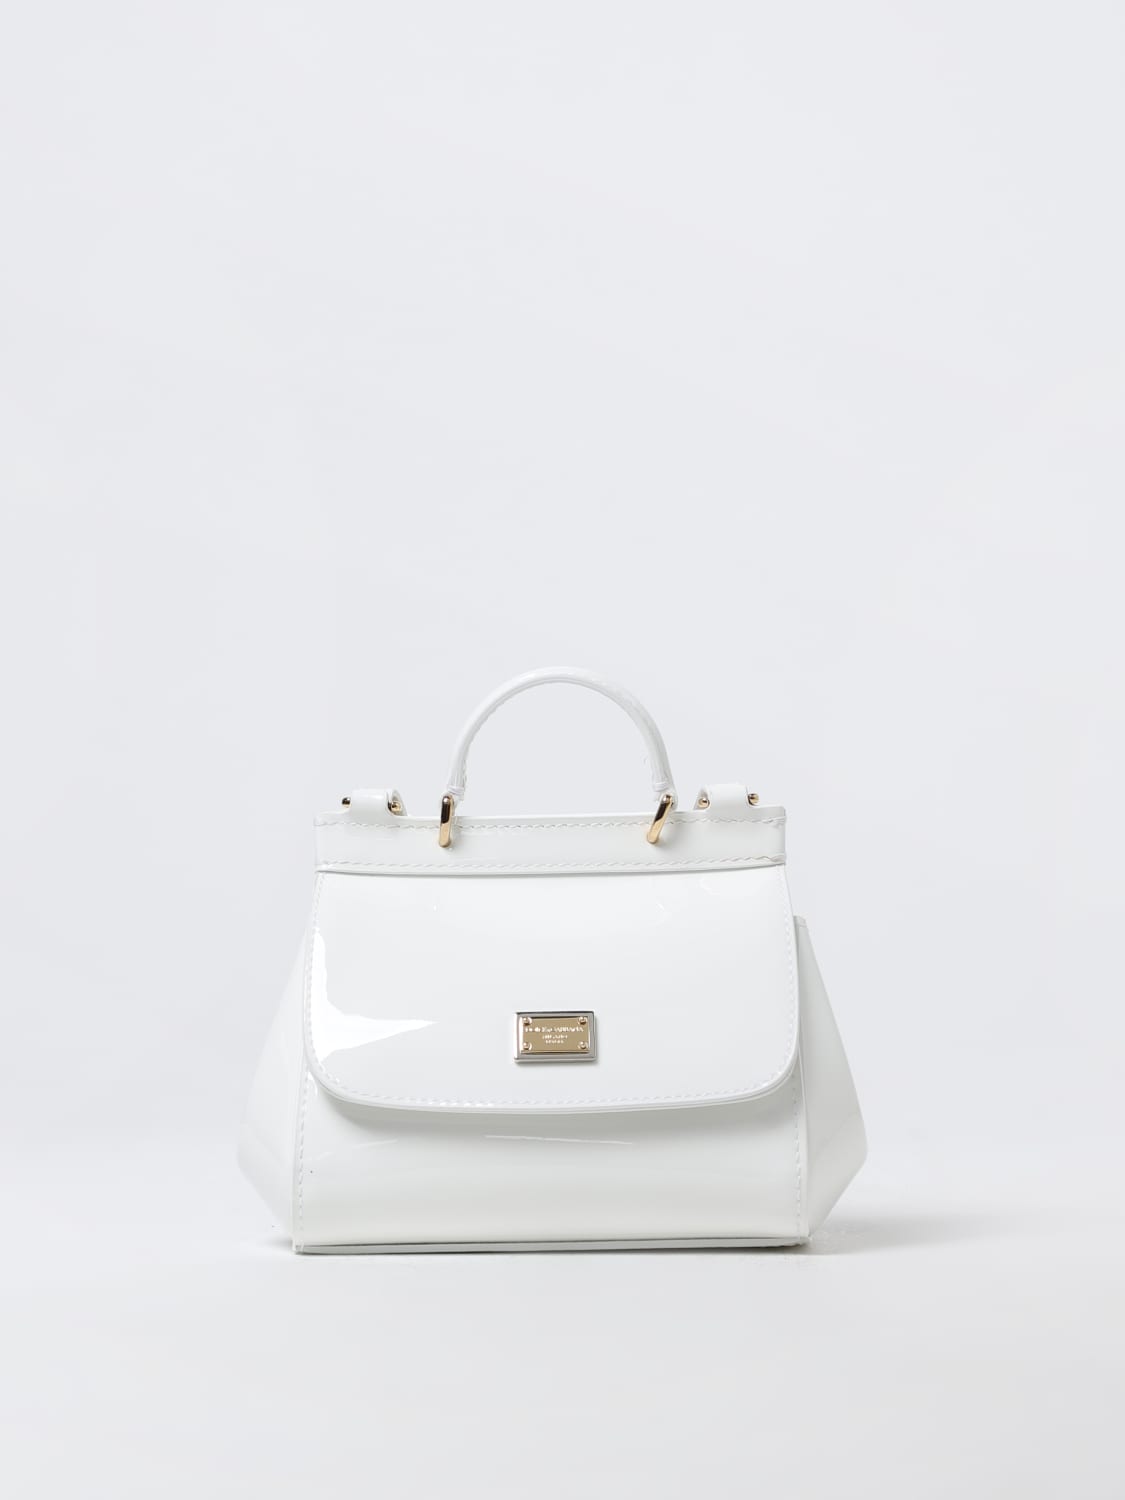 Dolce & Gabbana Sicily Bag in Patent Leather